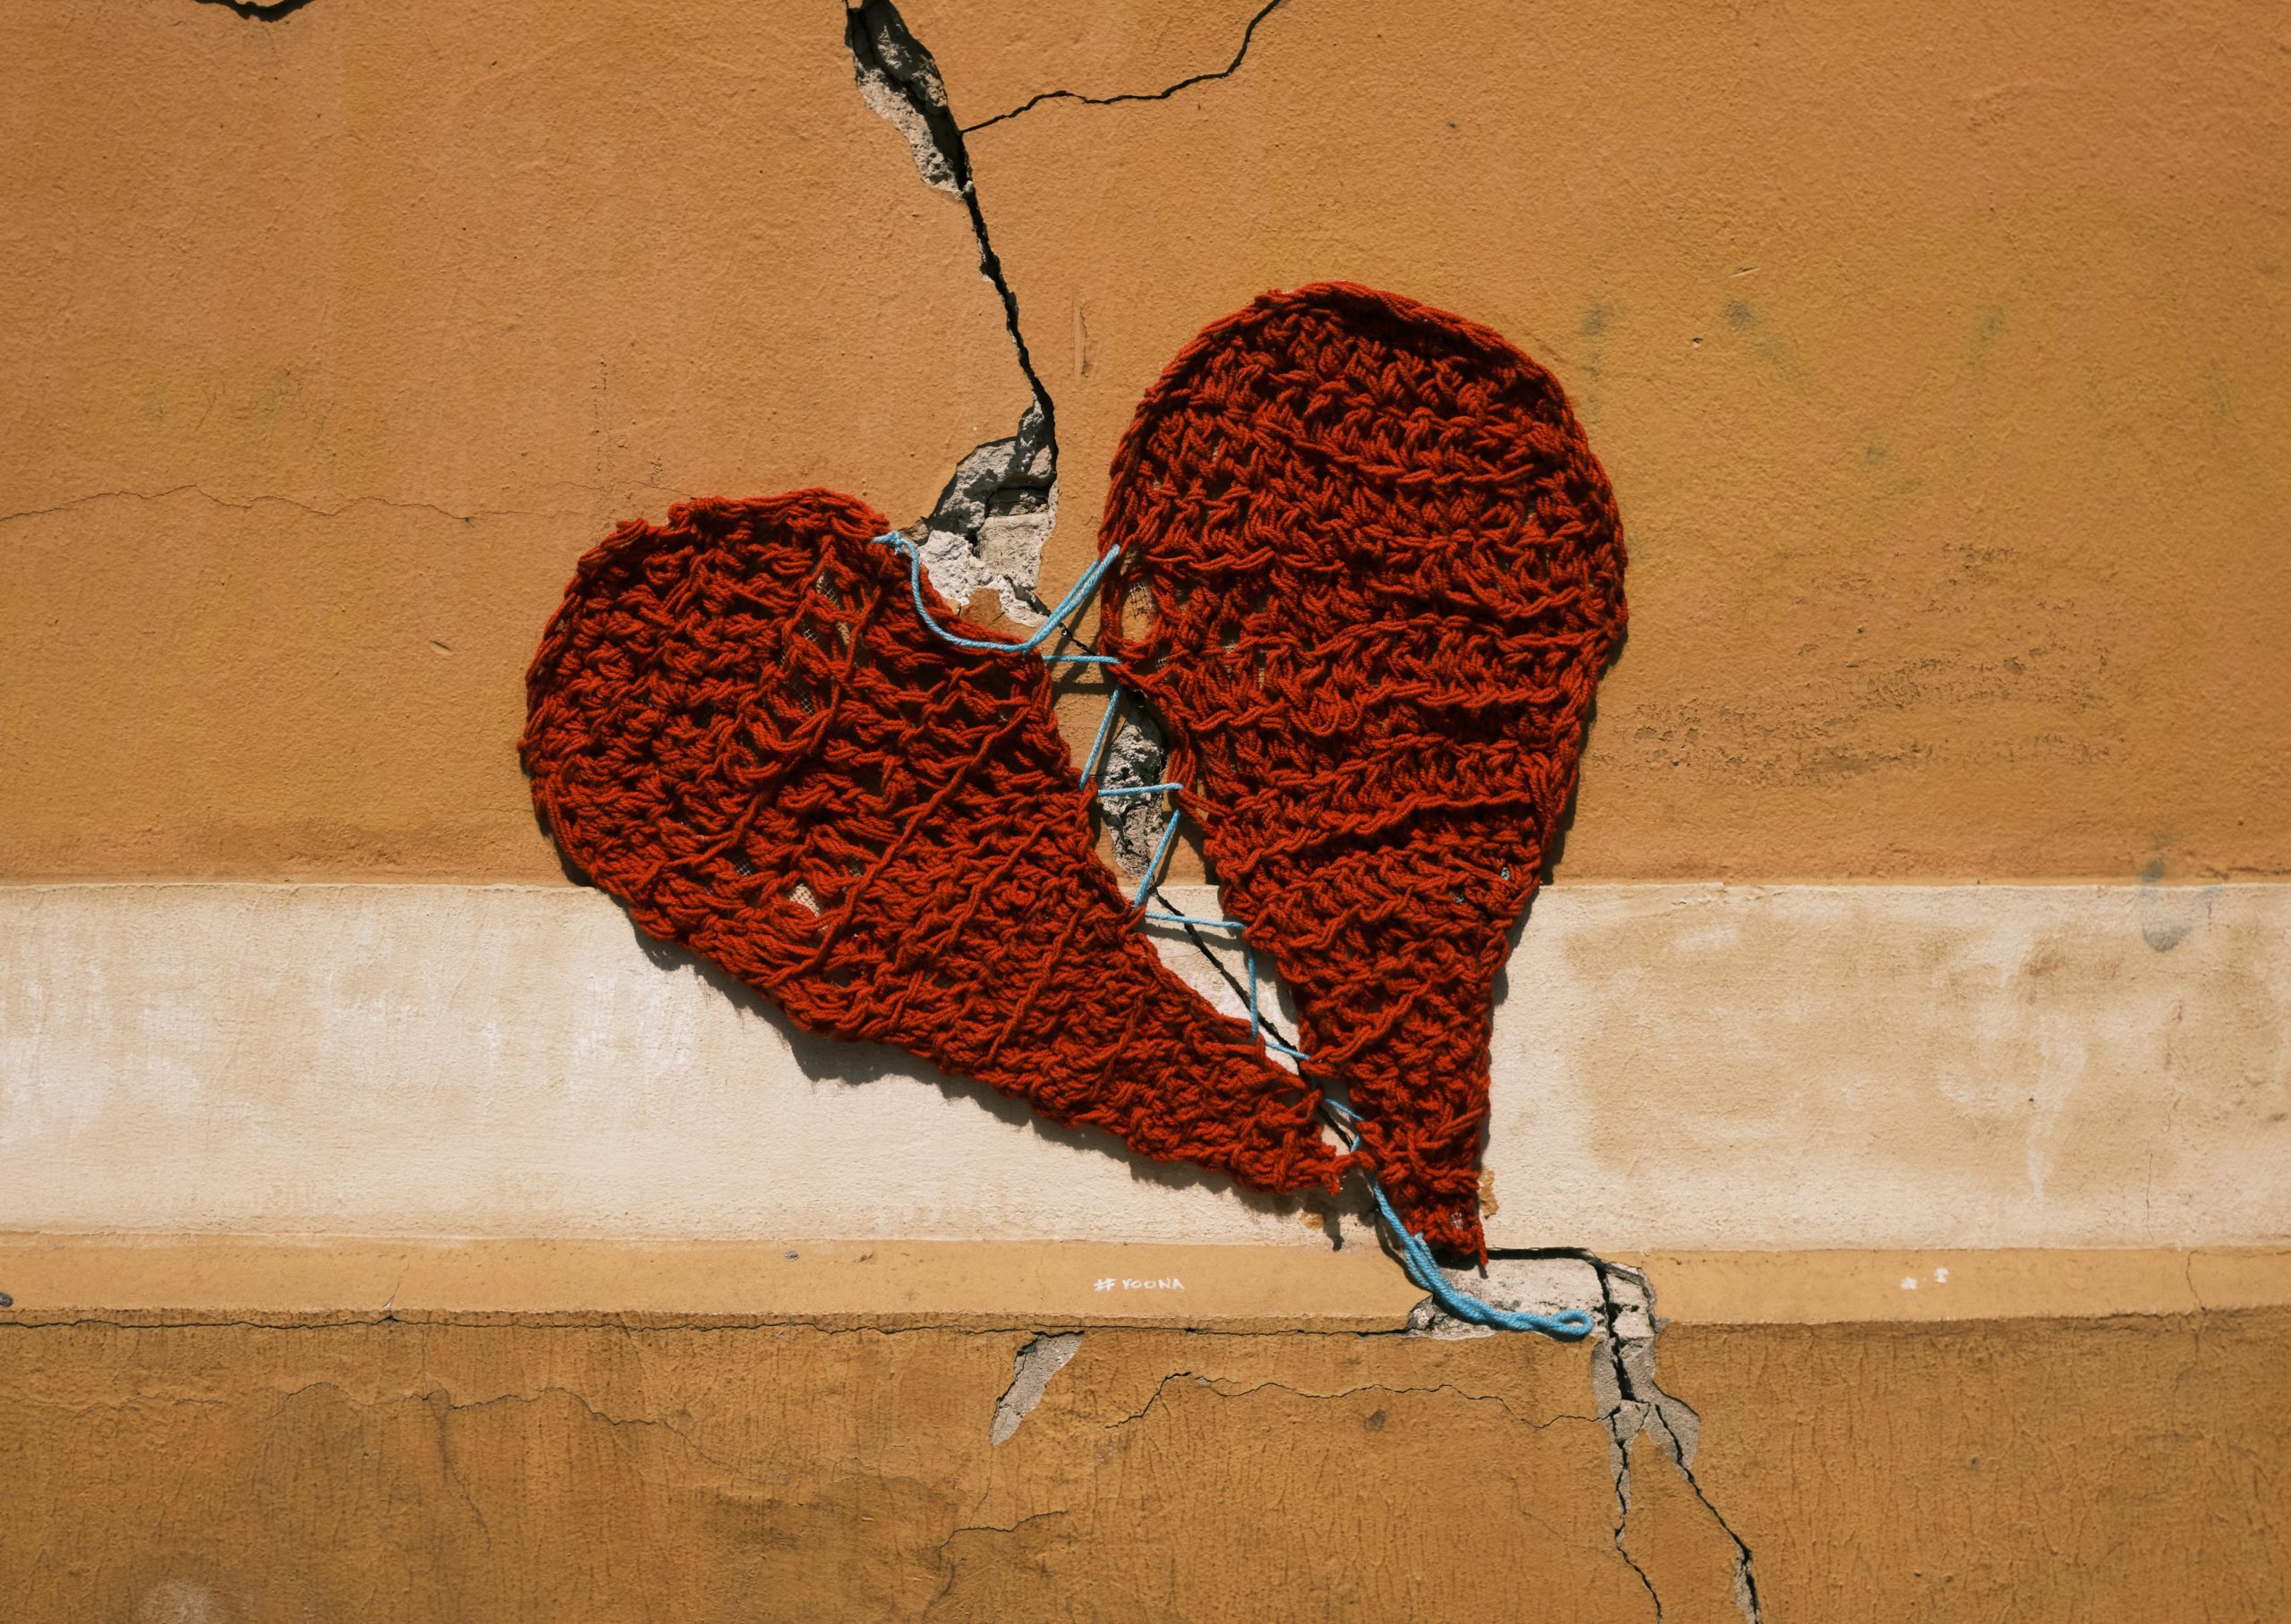 Stitched heart on plastered wall